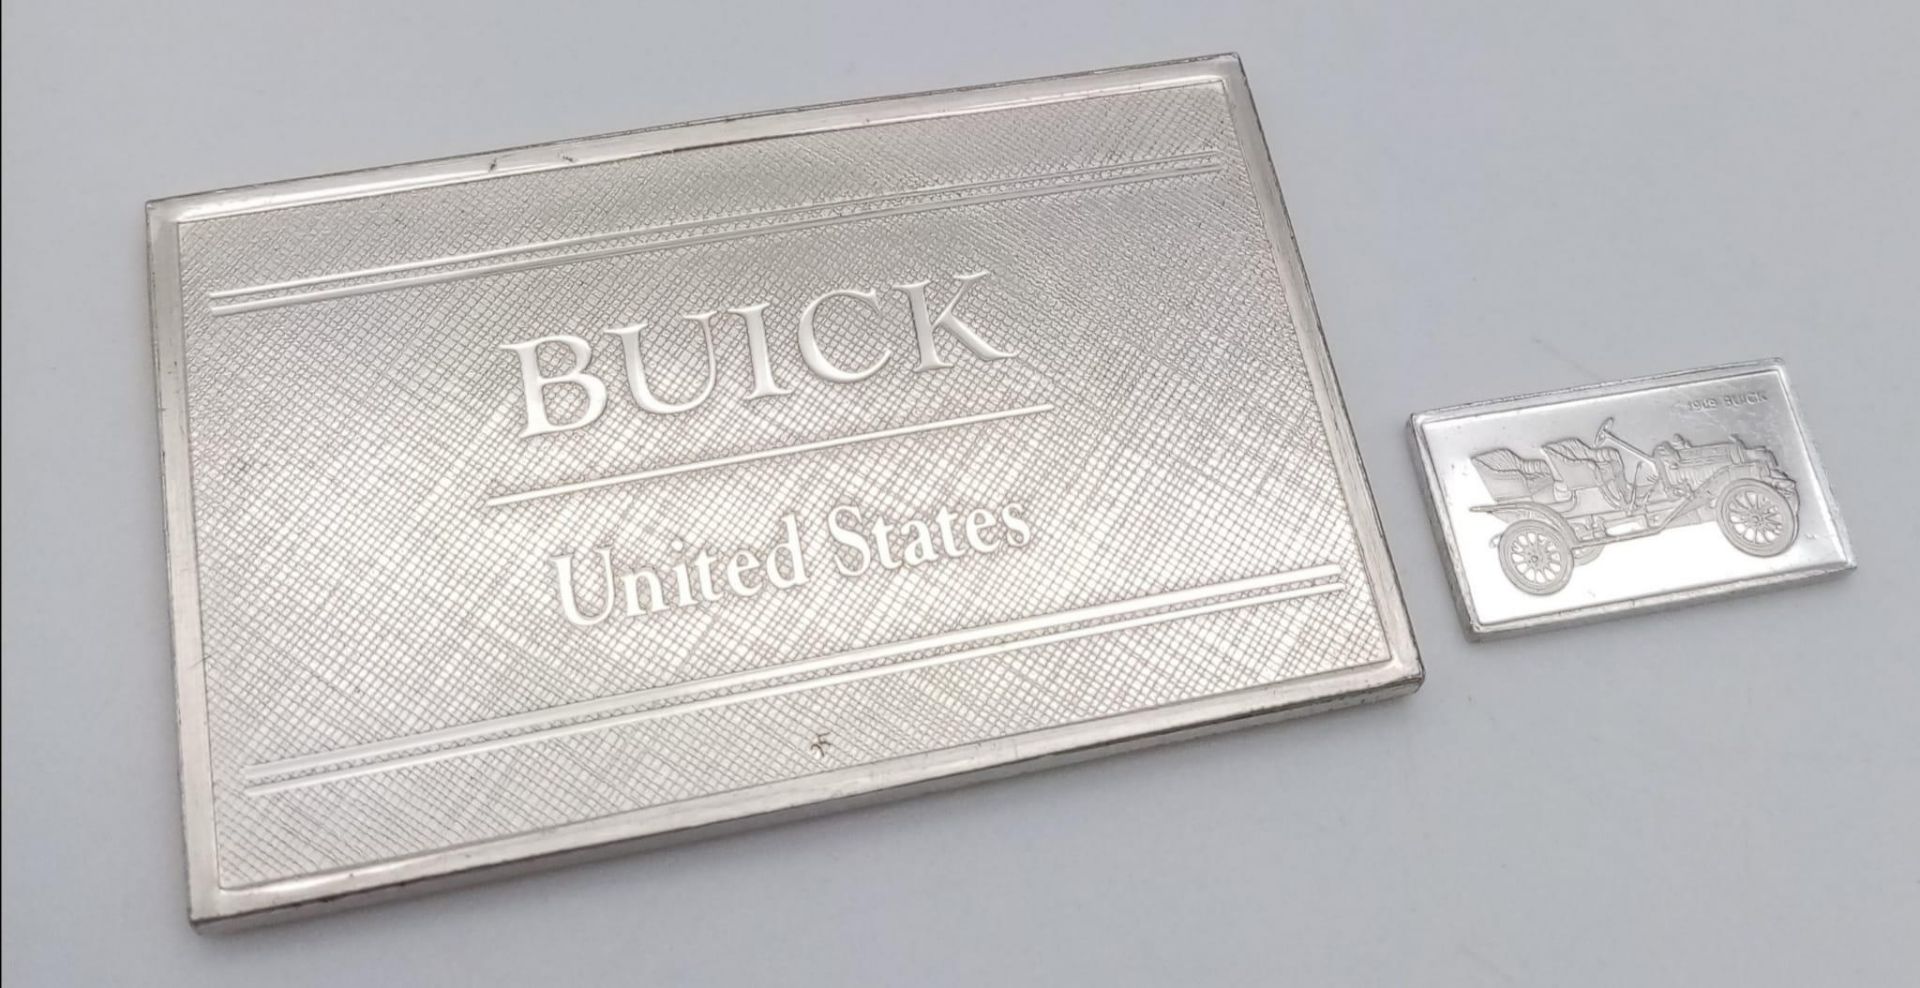 2 X STERLING SILVER AND ENAMEL BUICK CAR LOGO MANUFACTURER PLAQUES, MADE IN UNITED STATES USA, - Image 2 of 6